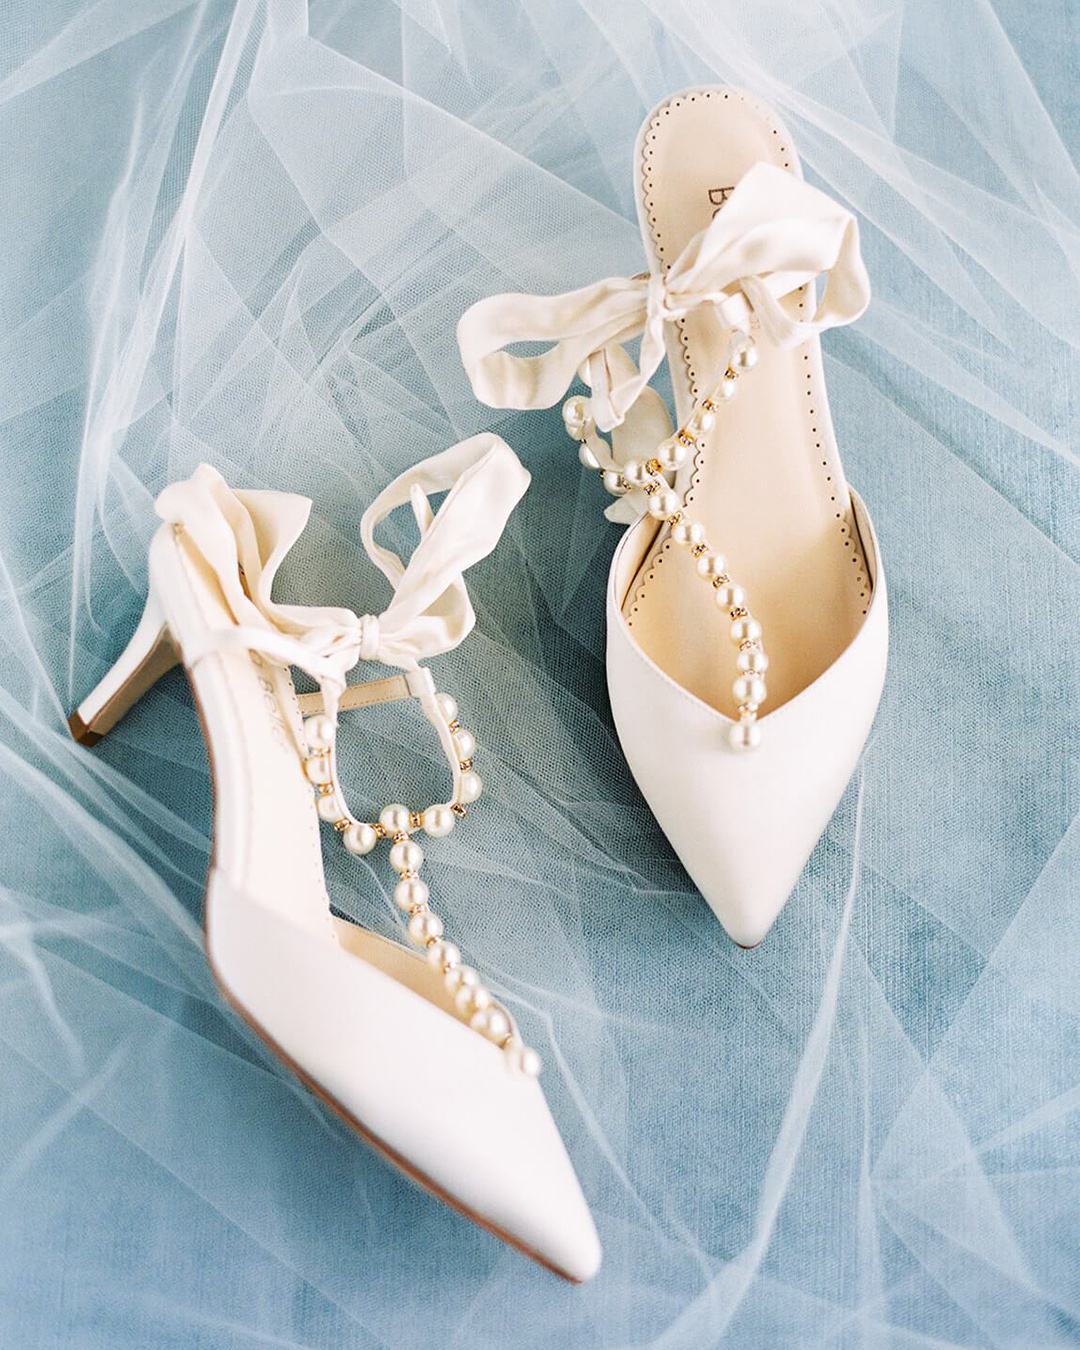 wedding shoes low heel white with pearls bella belle